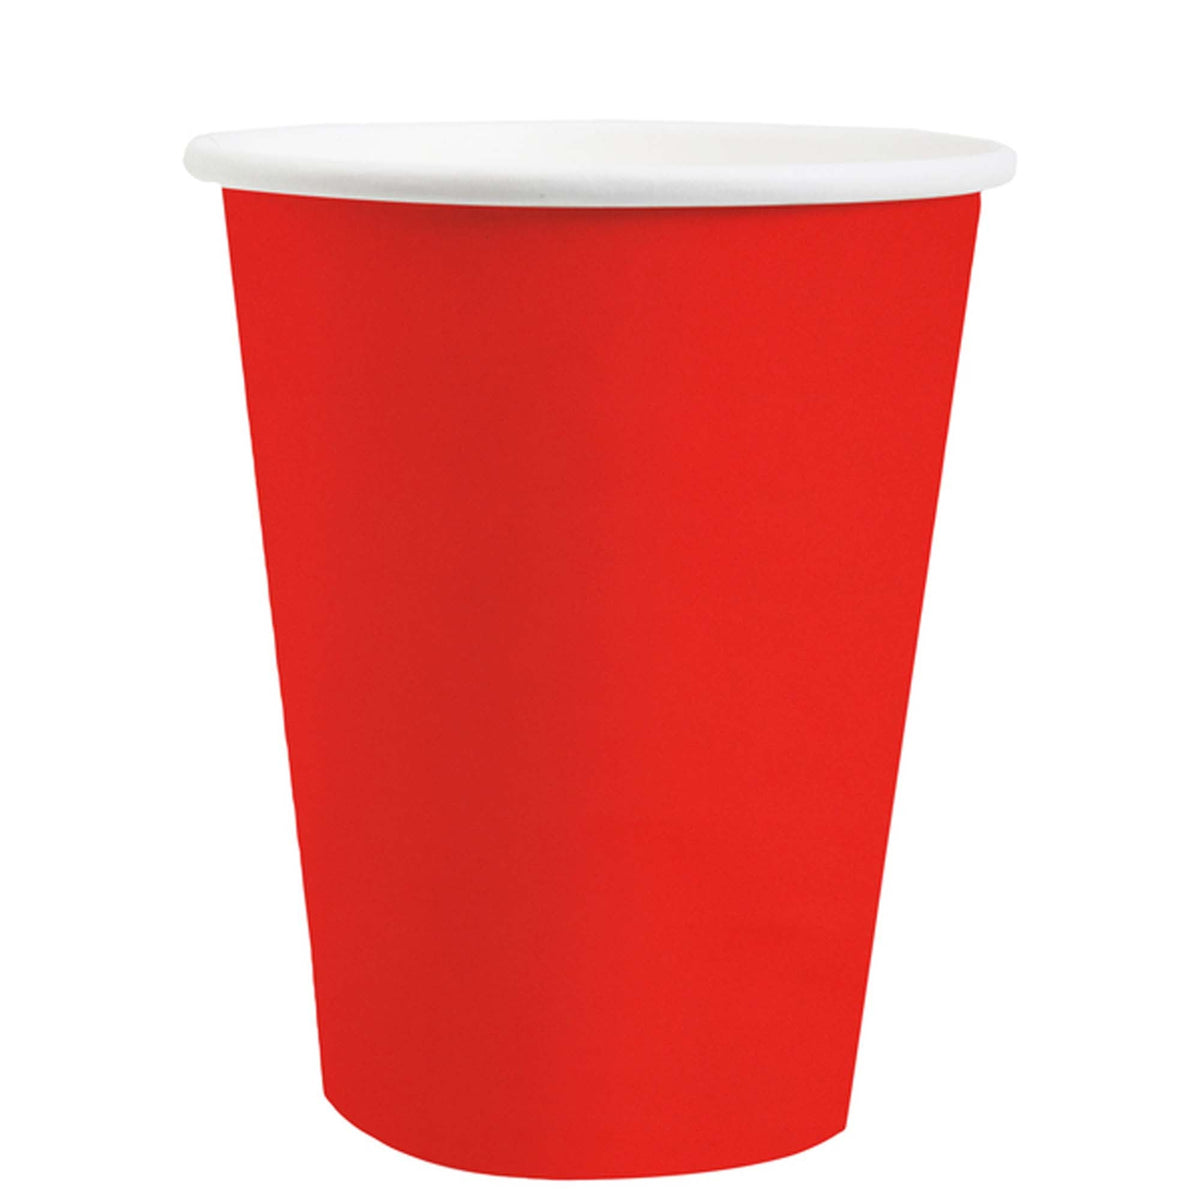 SANTEX Everyday Entertaining Red Party Paper Cups, 9 Oz, 10 Count 3660380072881